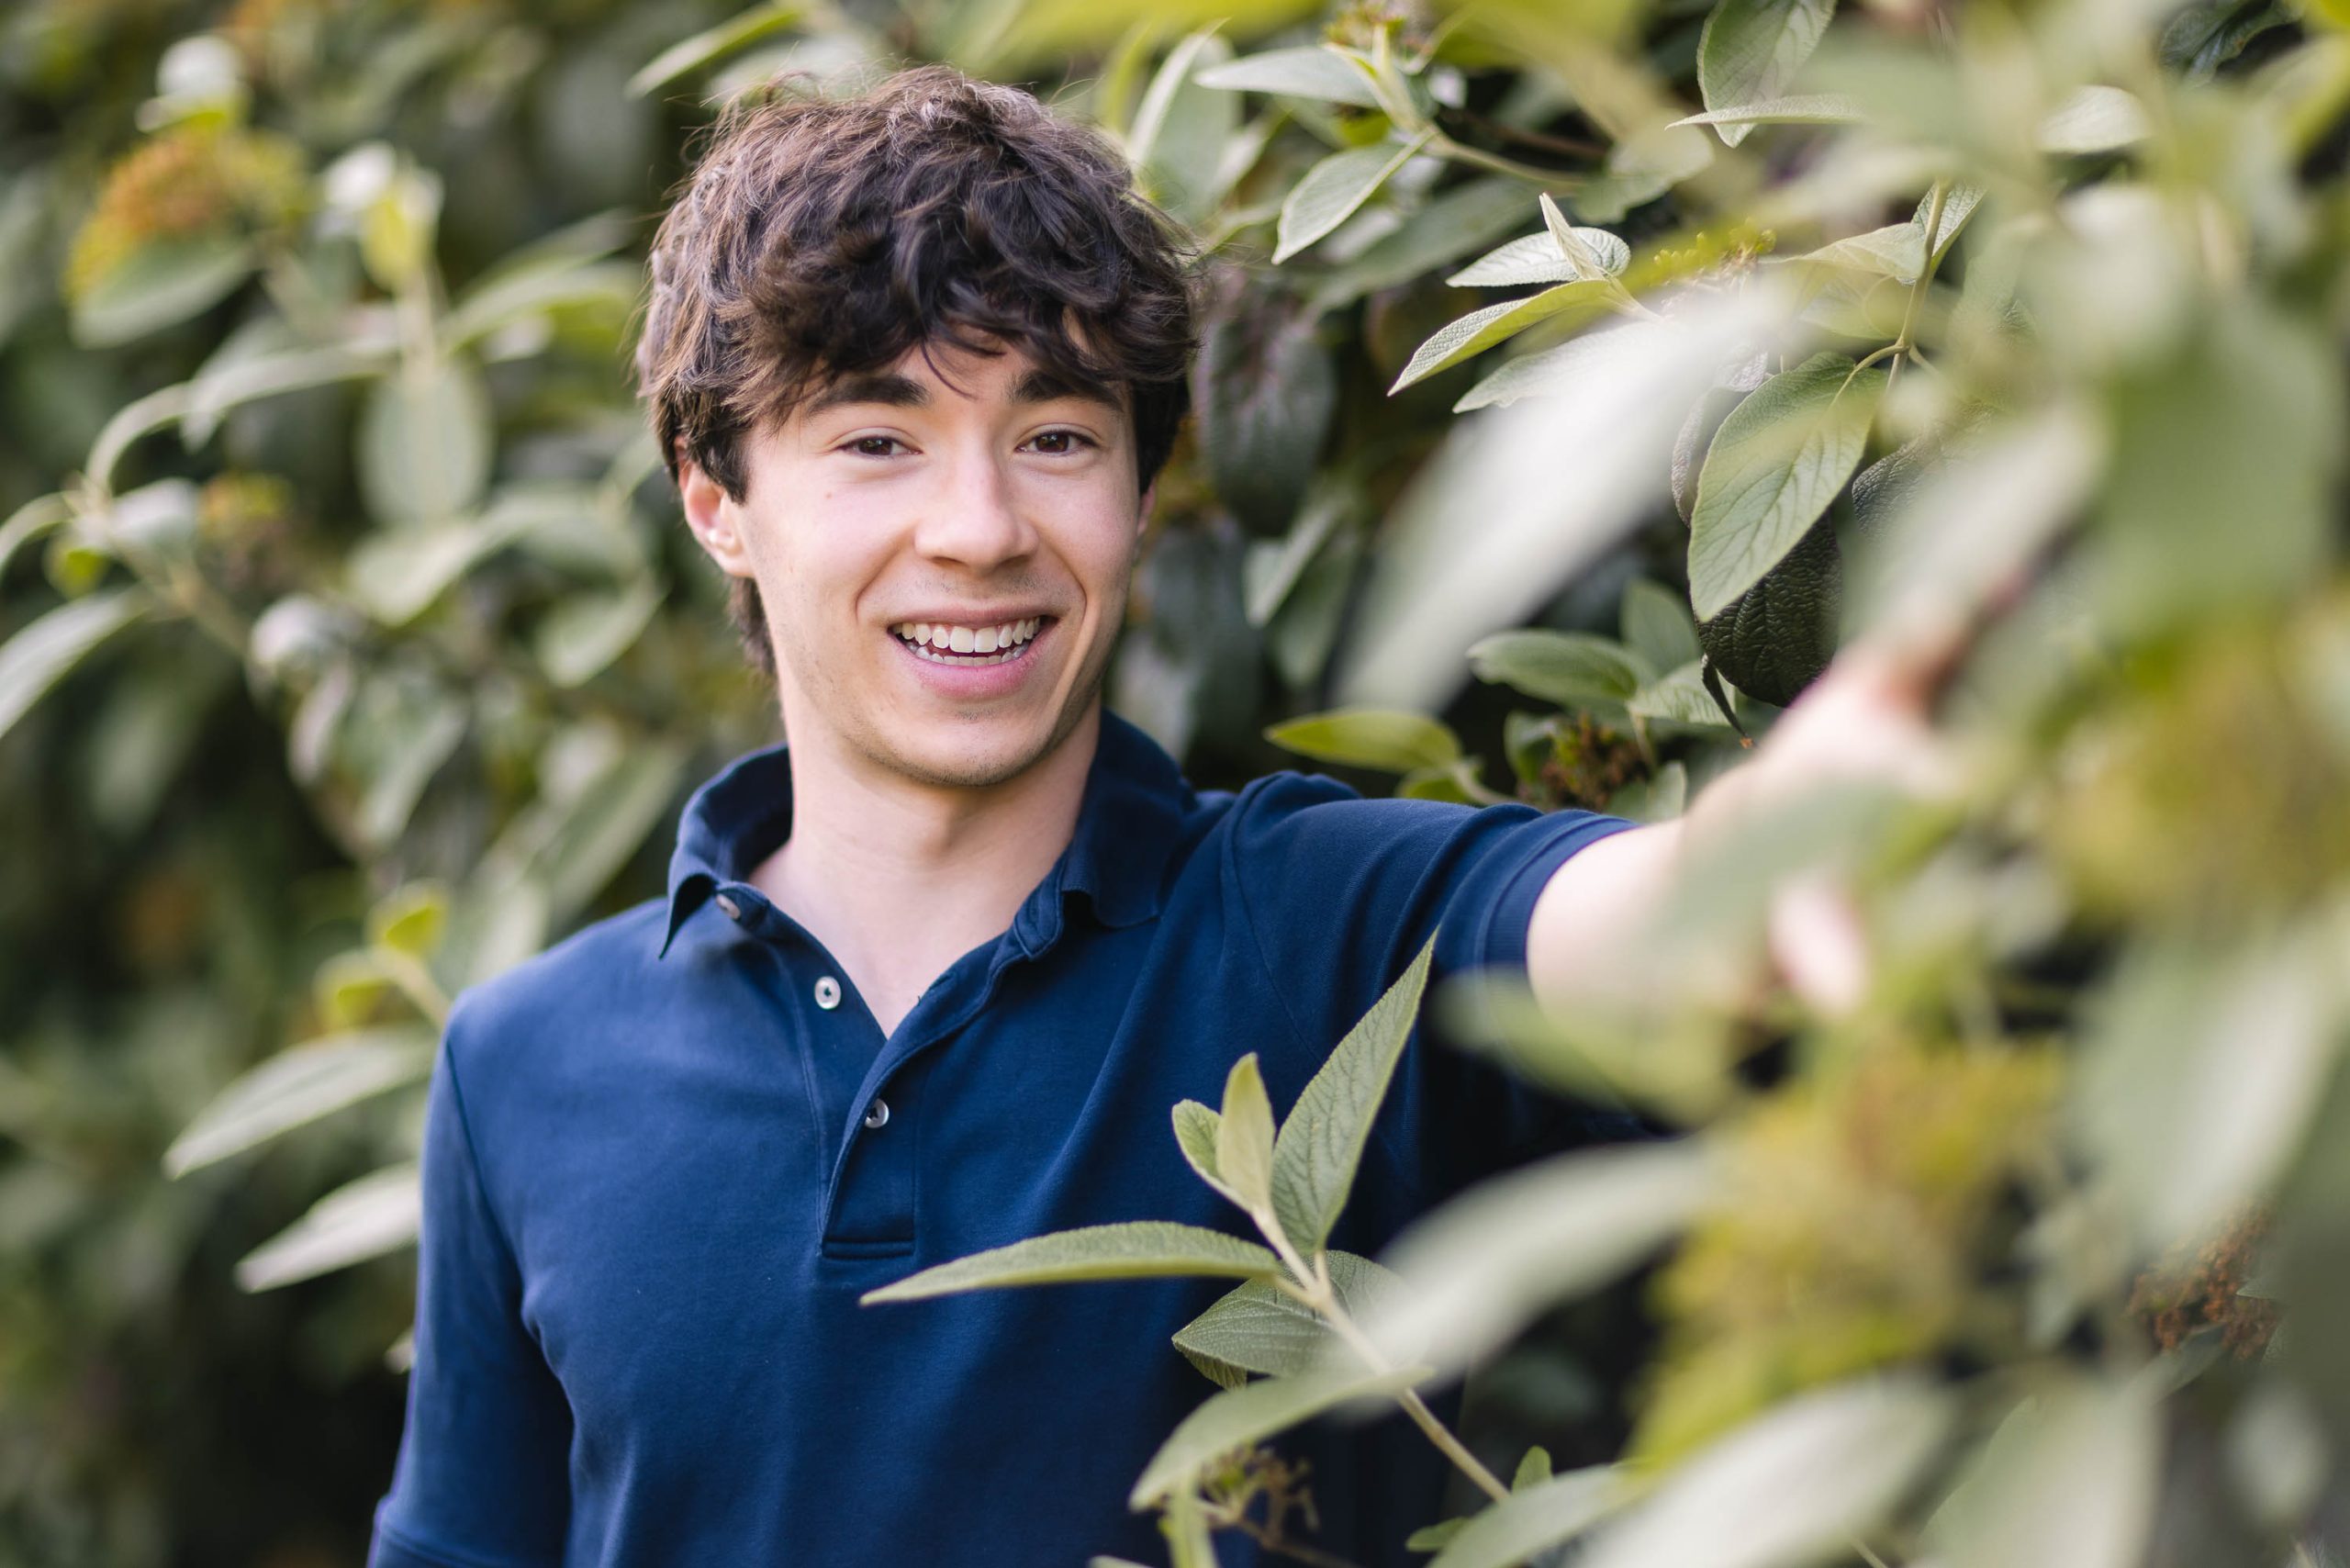 A young man in a blue shirt standing next to a bush for his senior portrait.